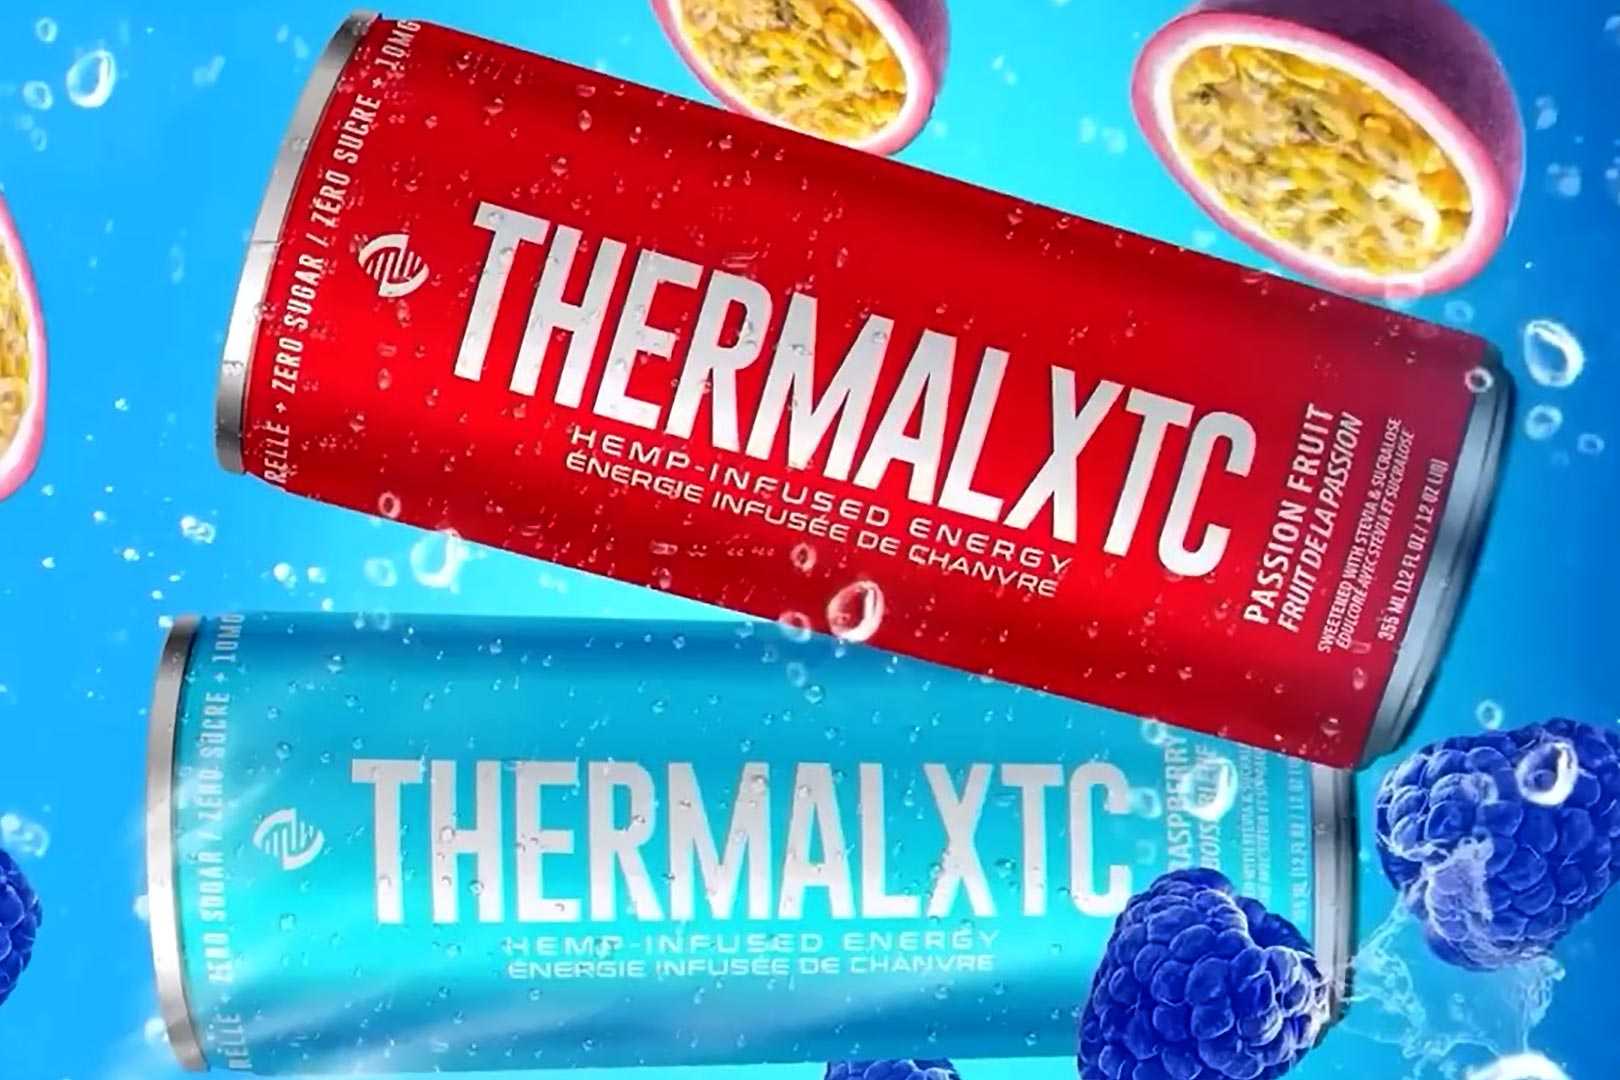 Nutrabolics Thermal Xtc Energy Drink